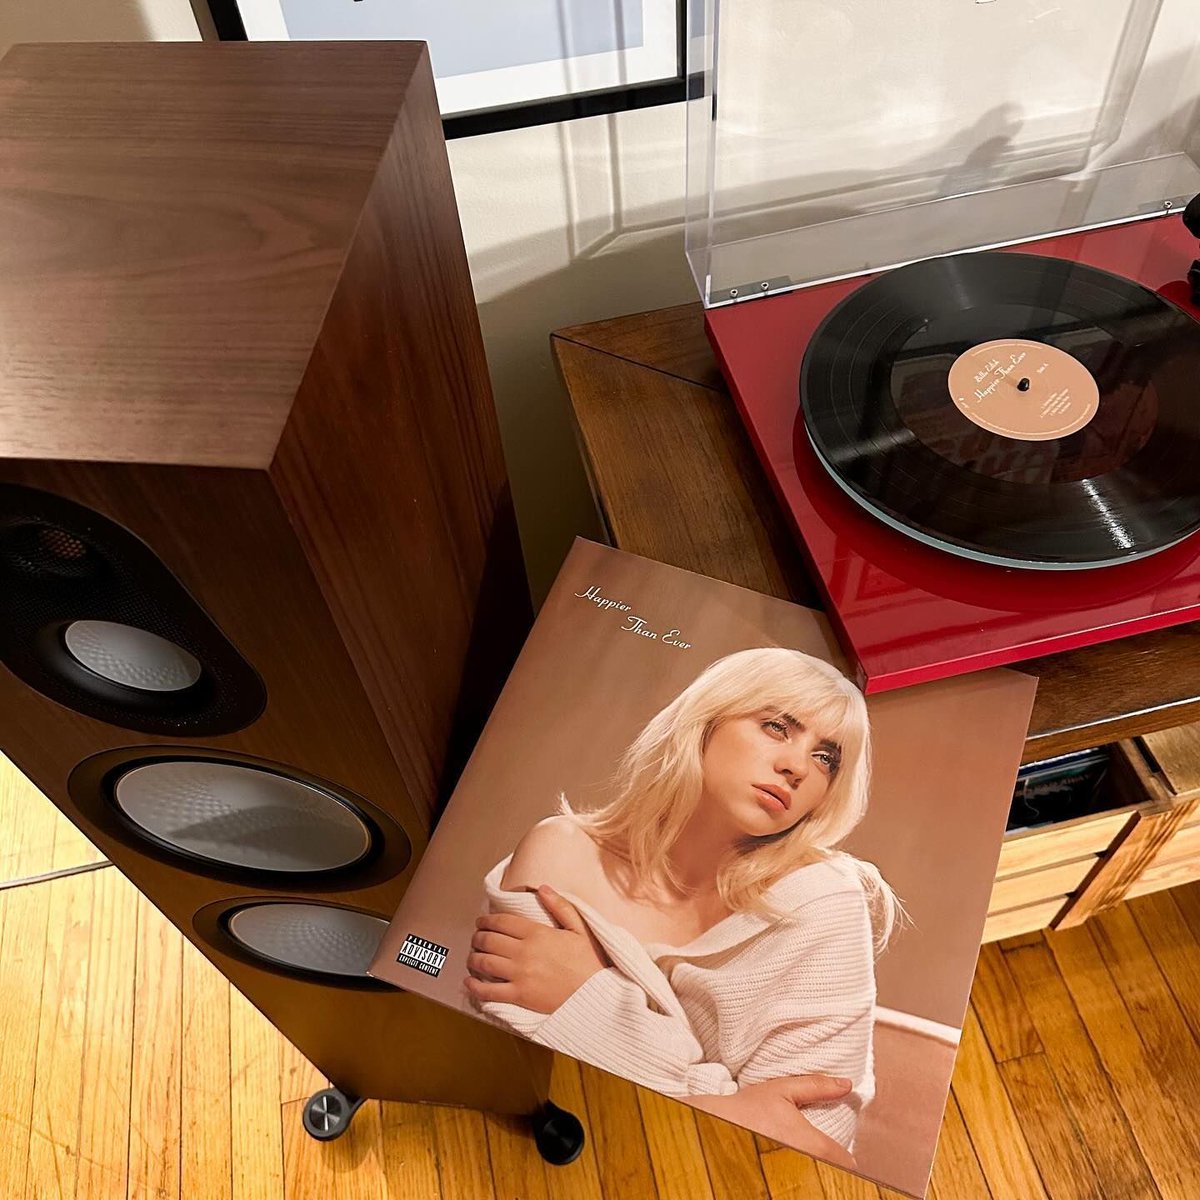 Billie Eilish continues to redefine the boundaries of pop music with her sophomore album, 'Happier Than Ever.' 🎶✨ 

📸 ig: harma808 

#collectionvinyl #lovevinyl #vinylmusic #vinylcollectors #vinyllife #recordcollectionpost #recordlover #igvinyl #recordscollection